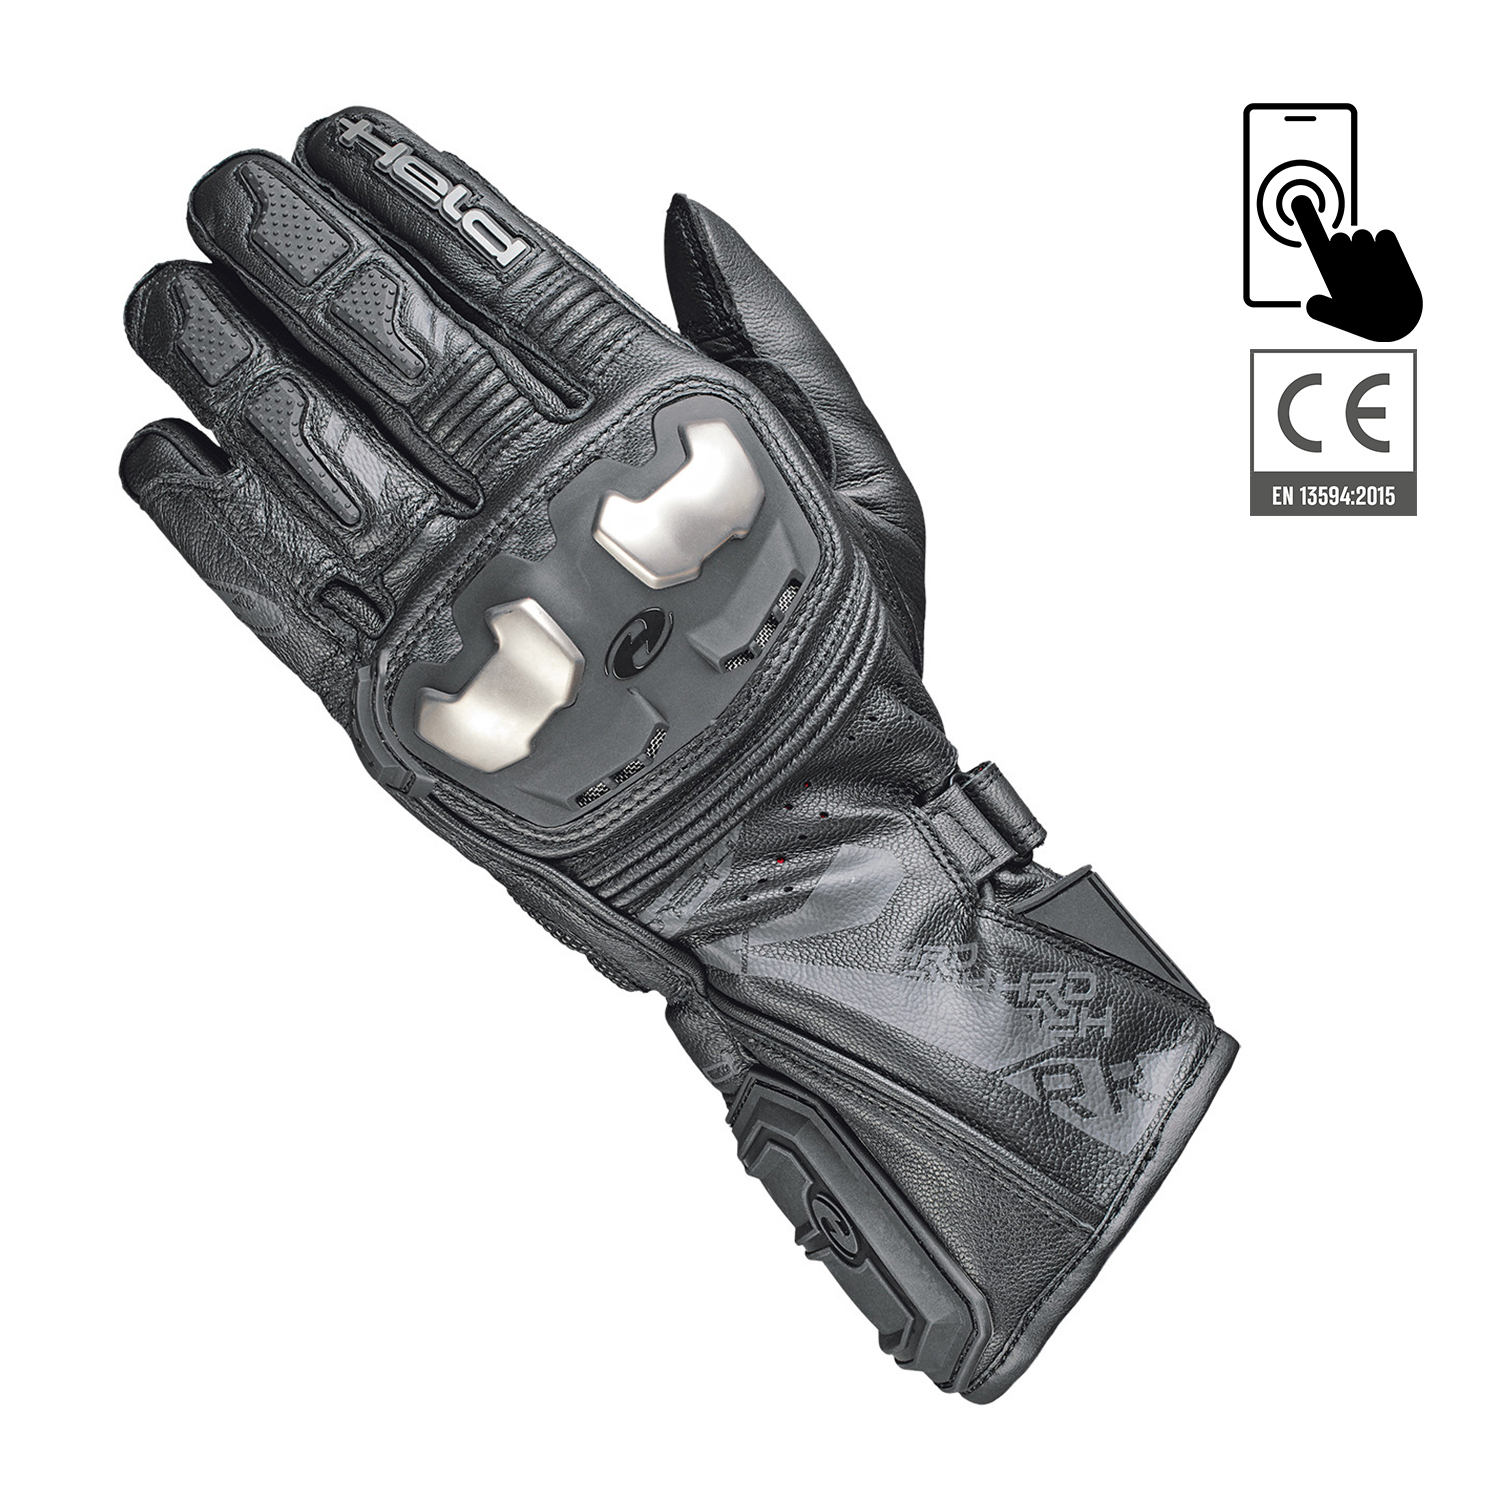 Held Akira RR Gloves Black - Available in Various Sizes